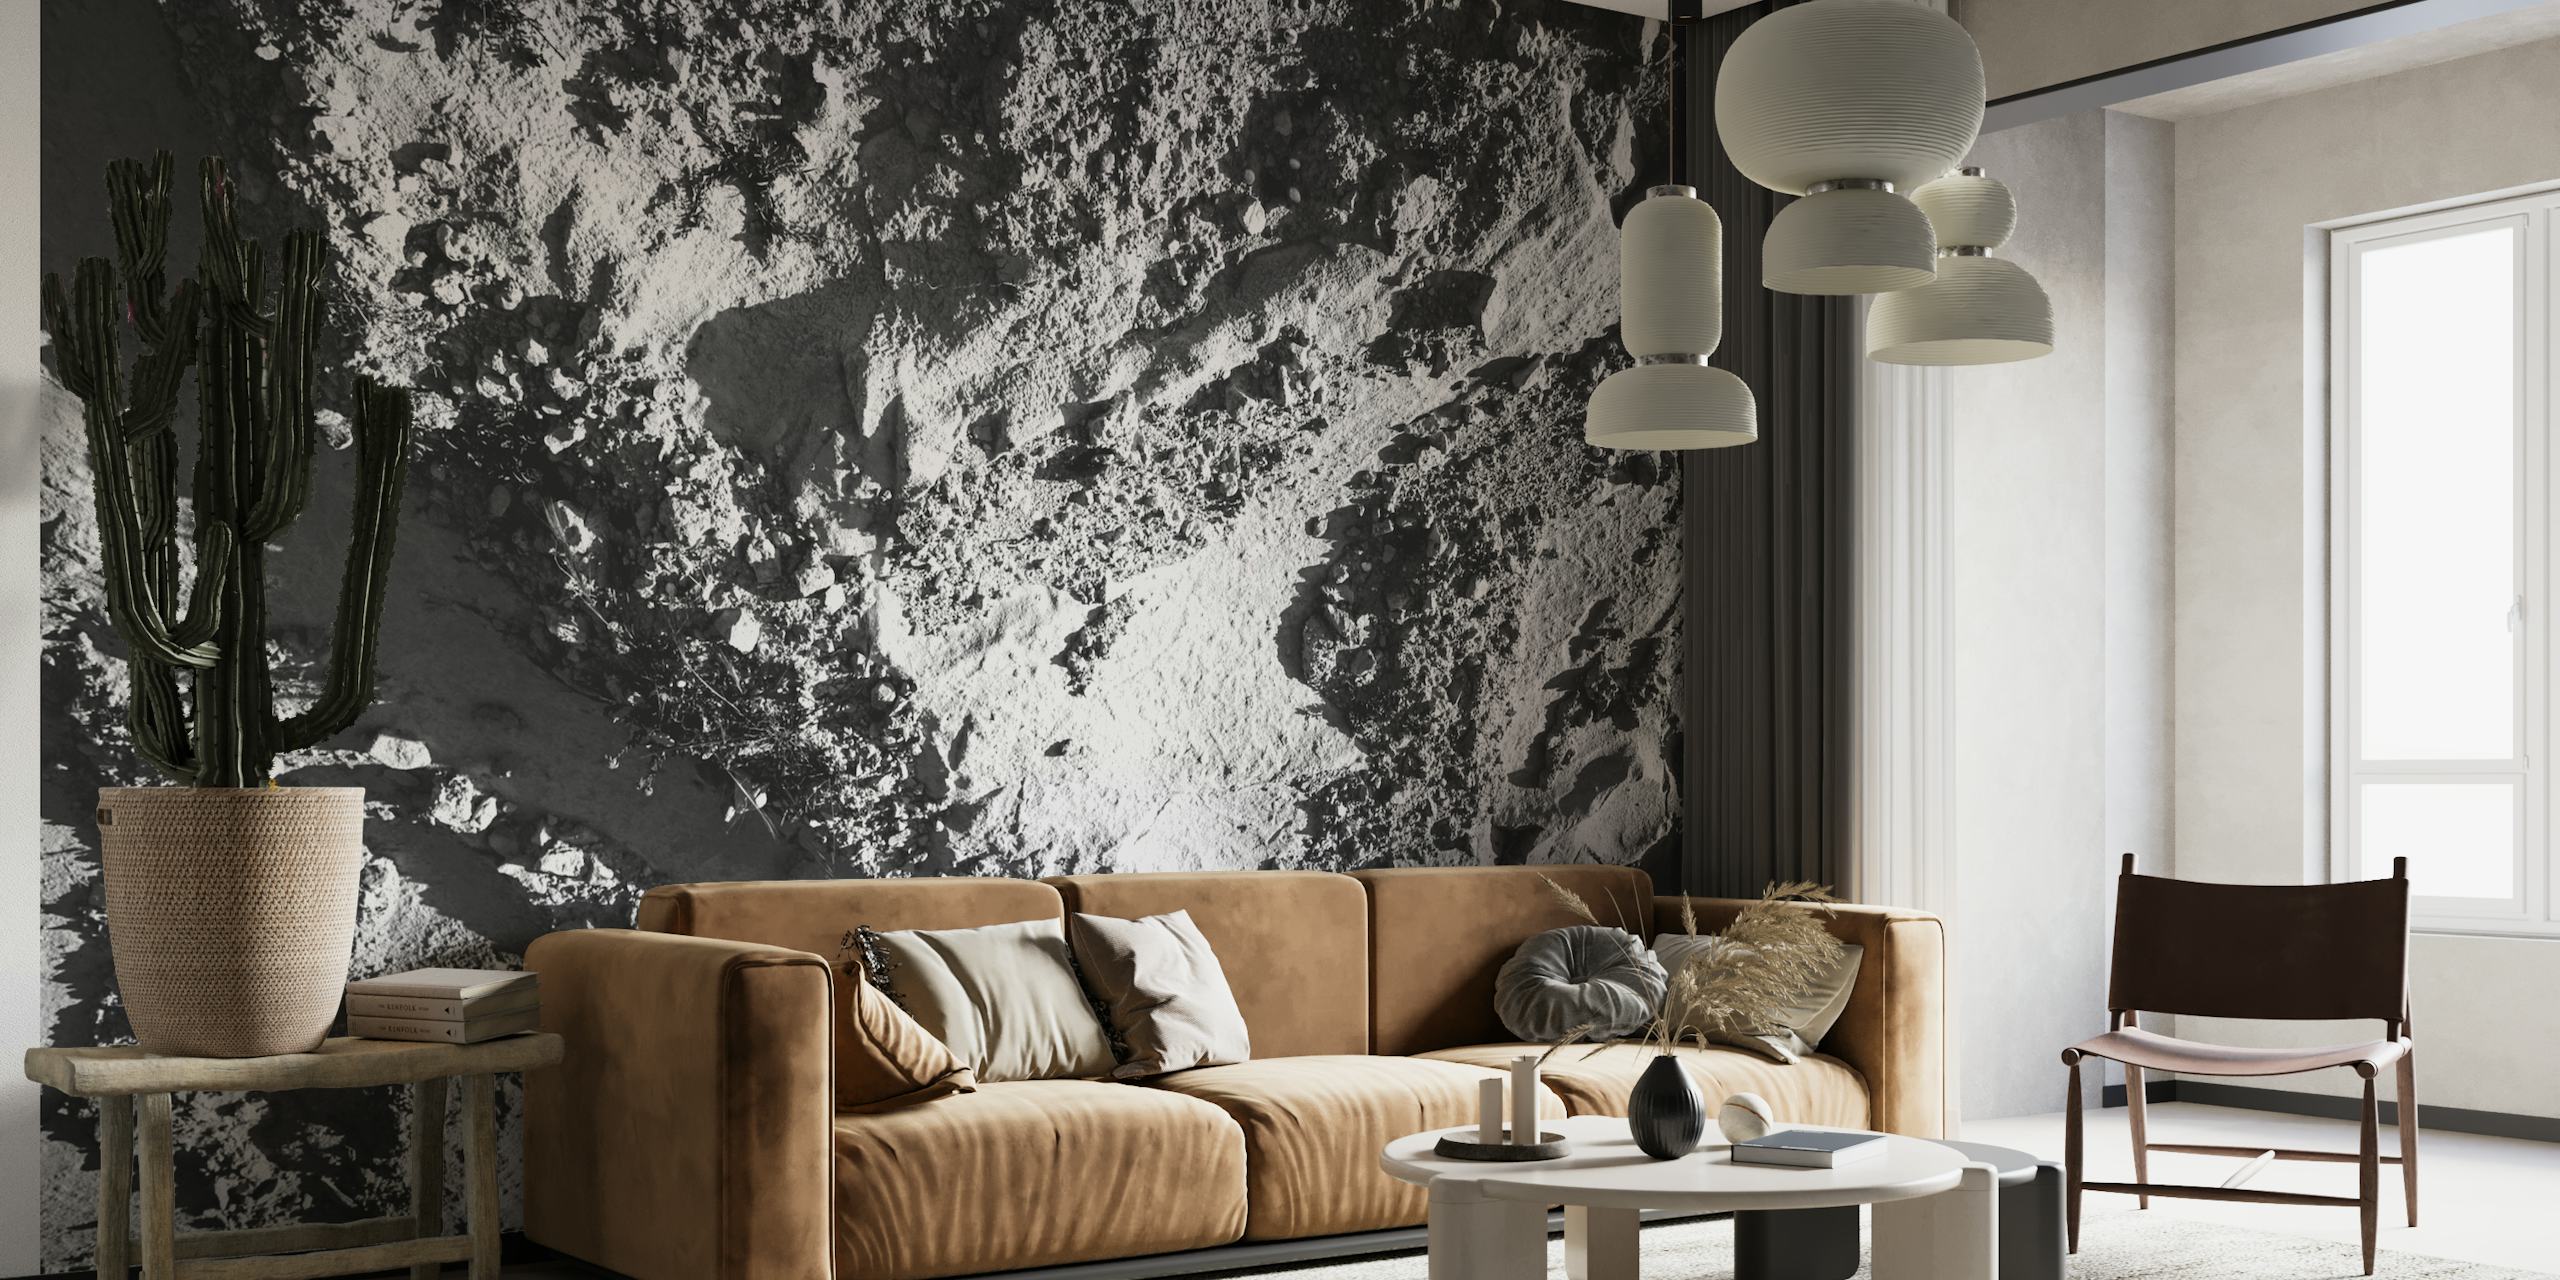 Monochrome abstract art wall mural depicting organic shapes and textures